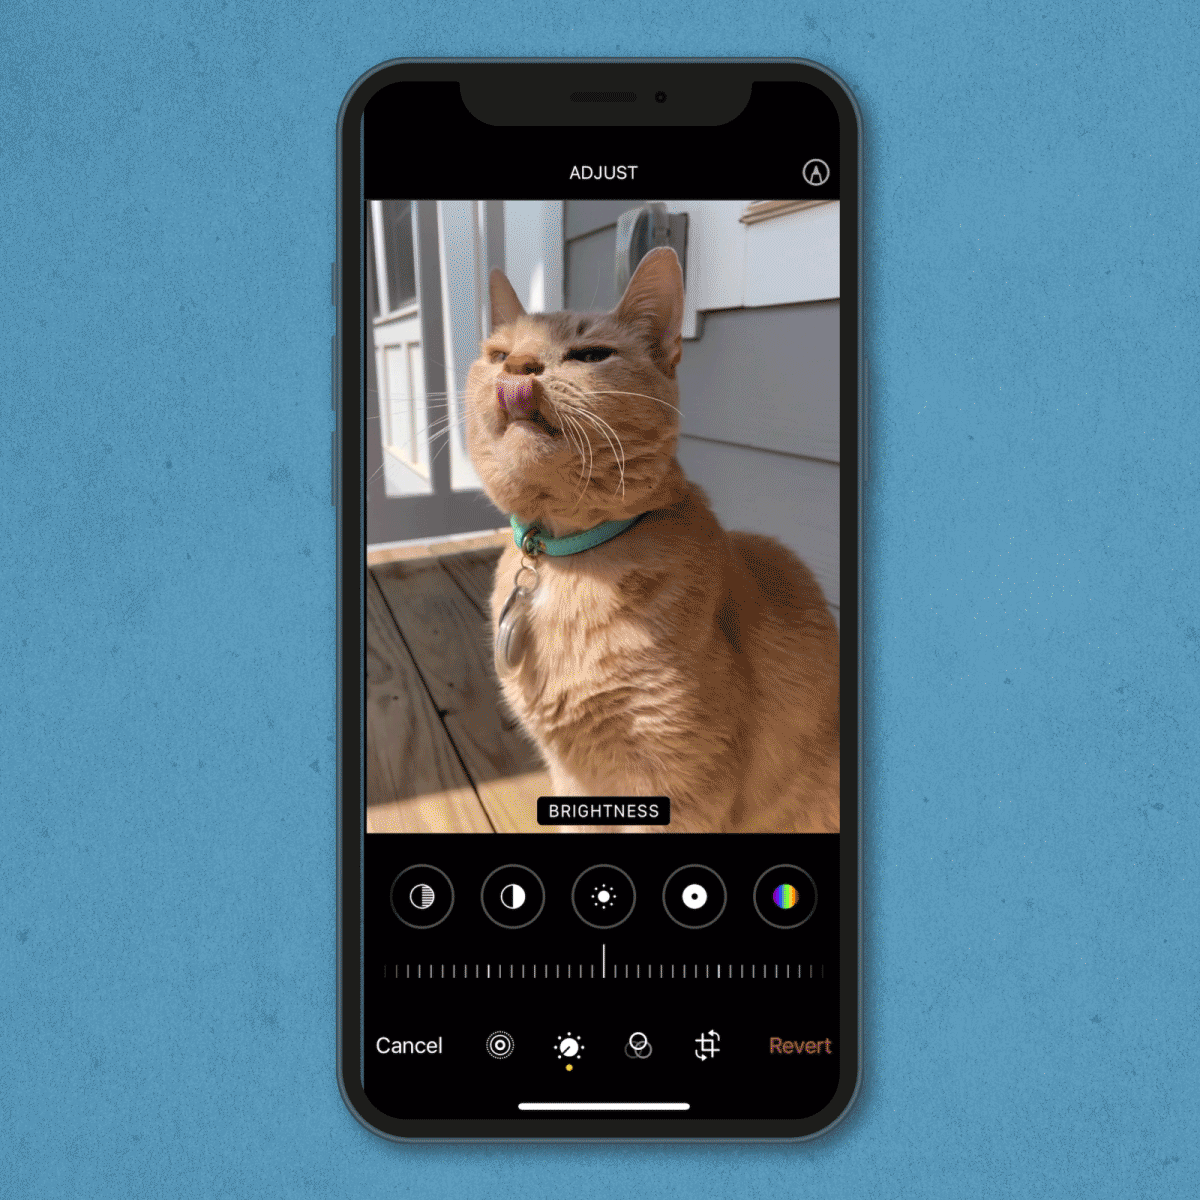 gif showing how to edit a photo's brightness on an iPhone